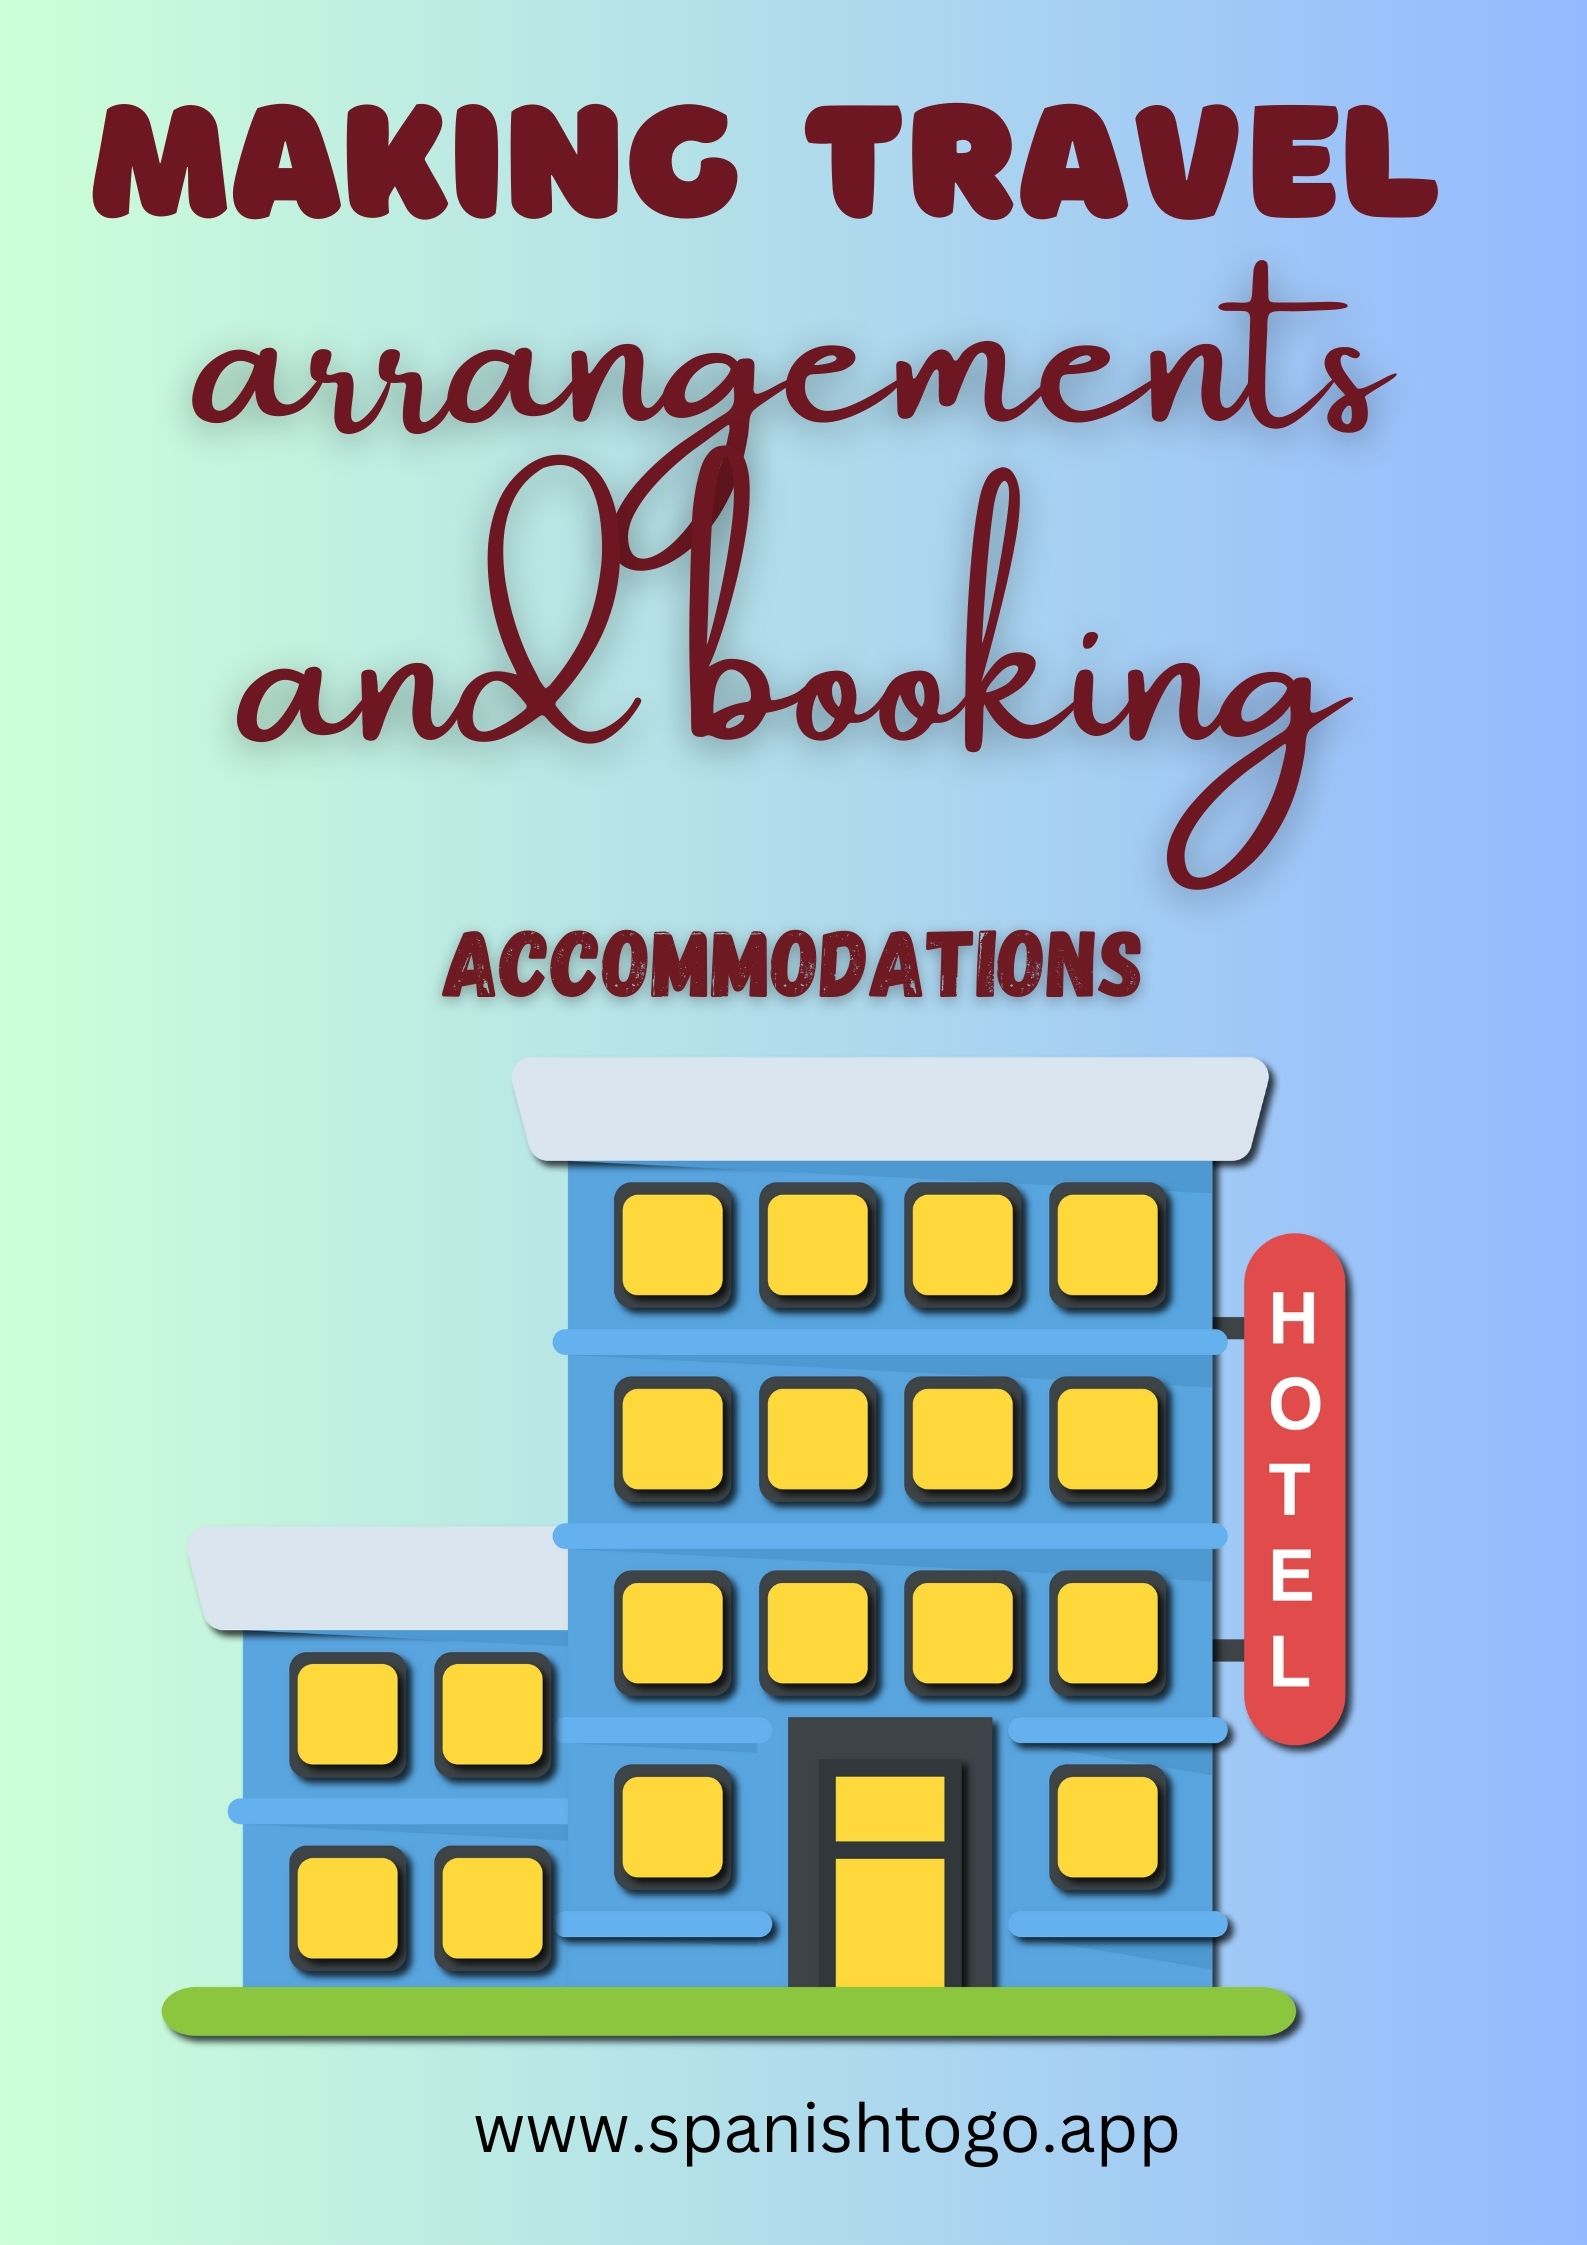 Making travel arrangements and booking accommodations